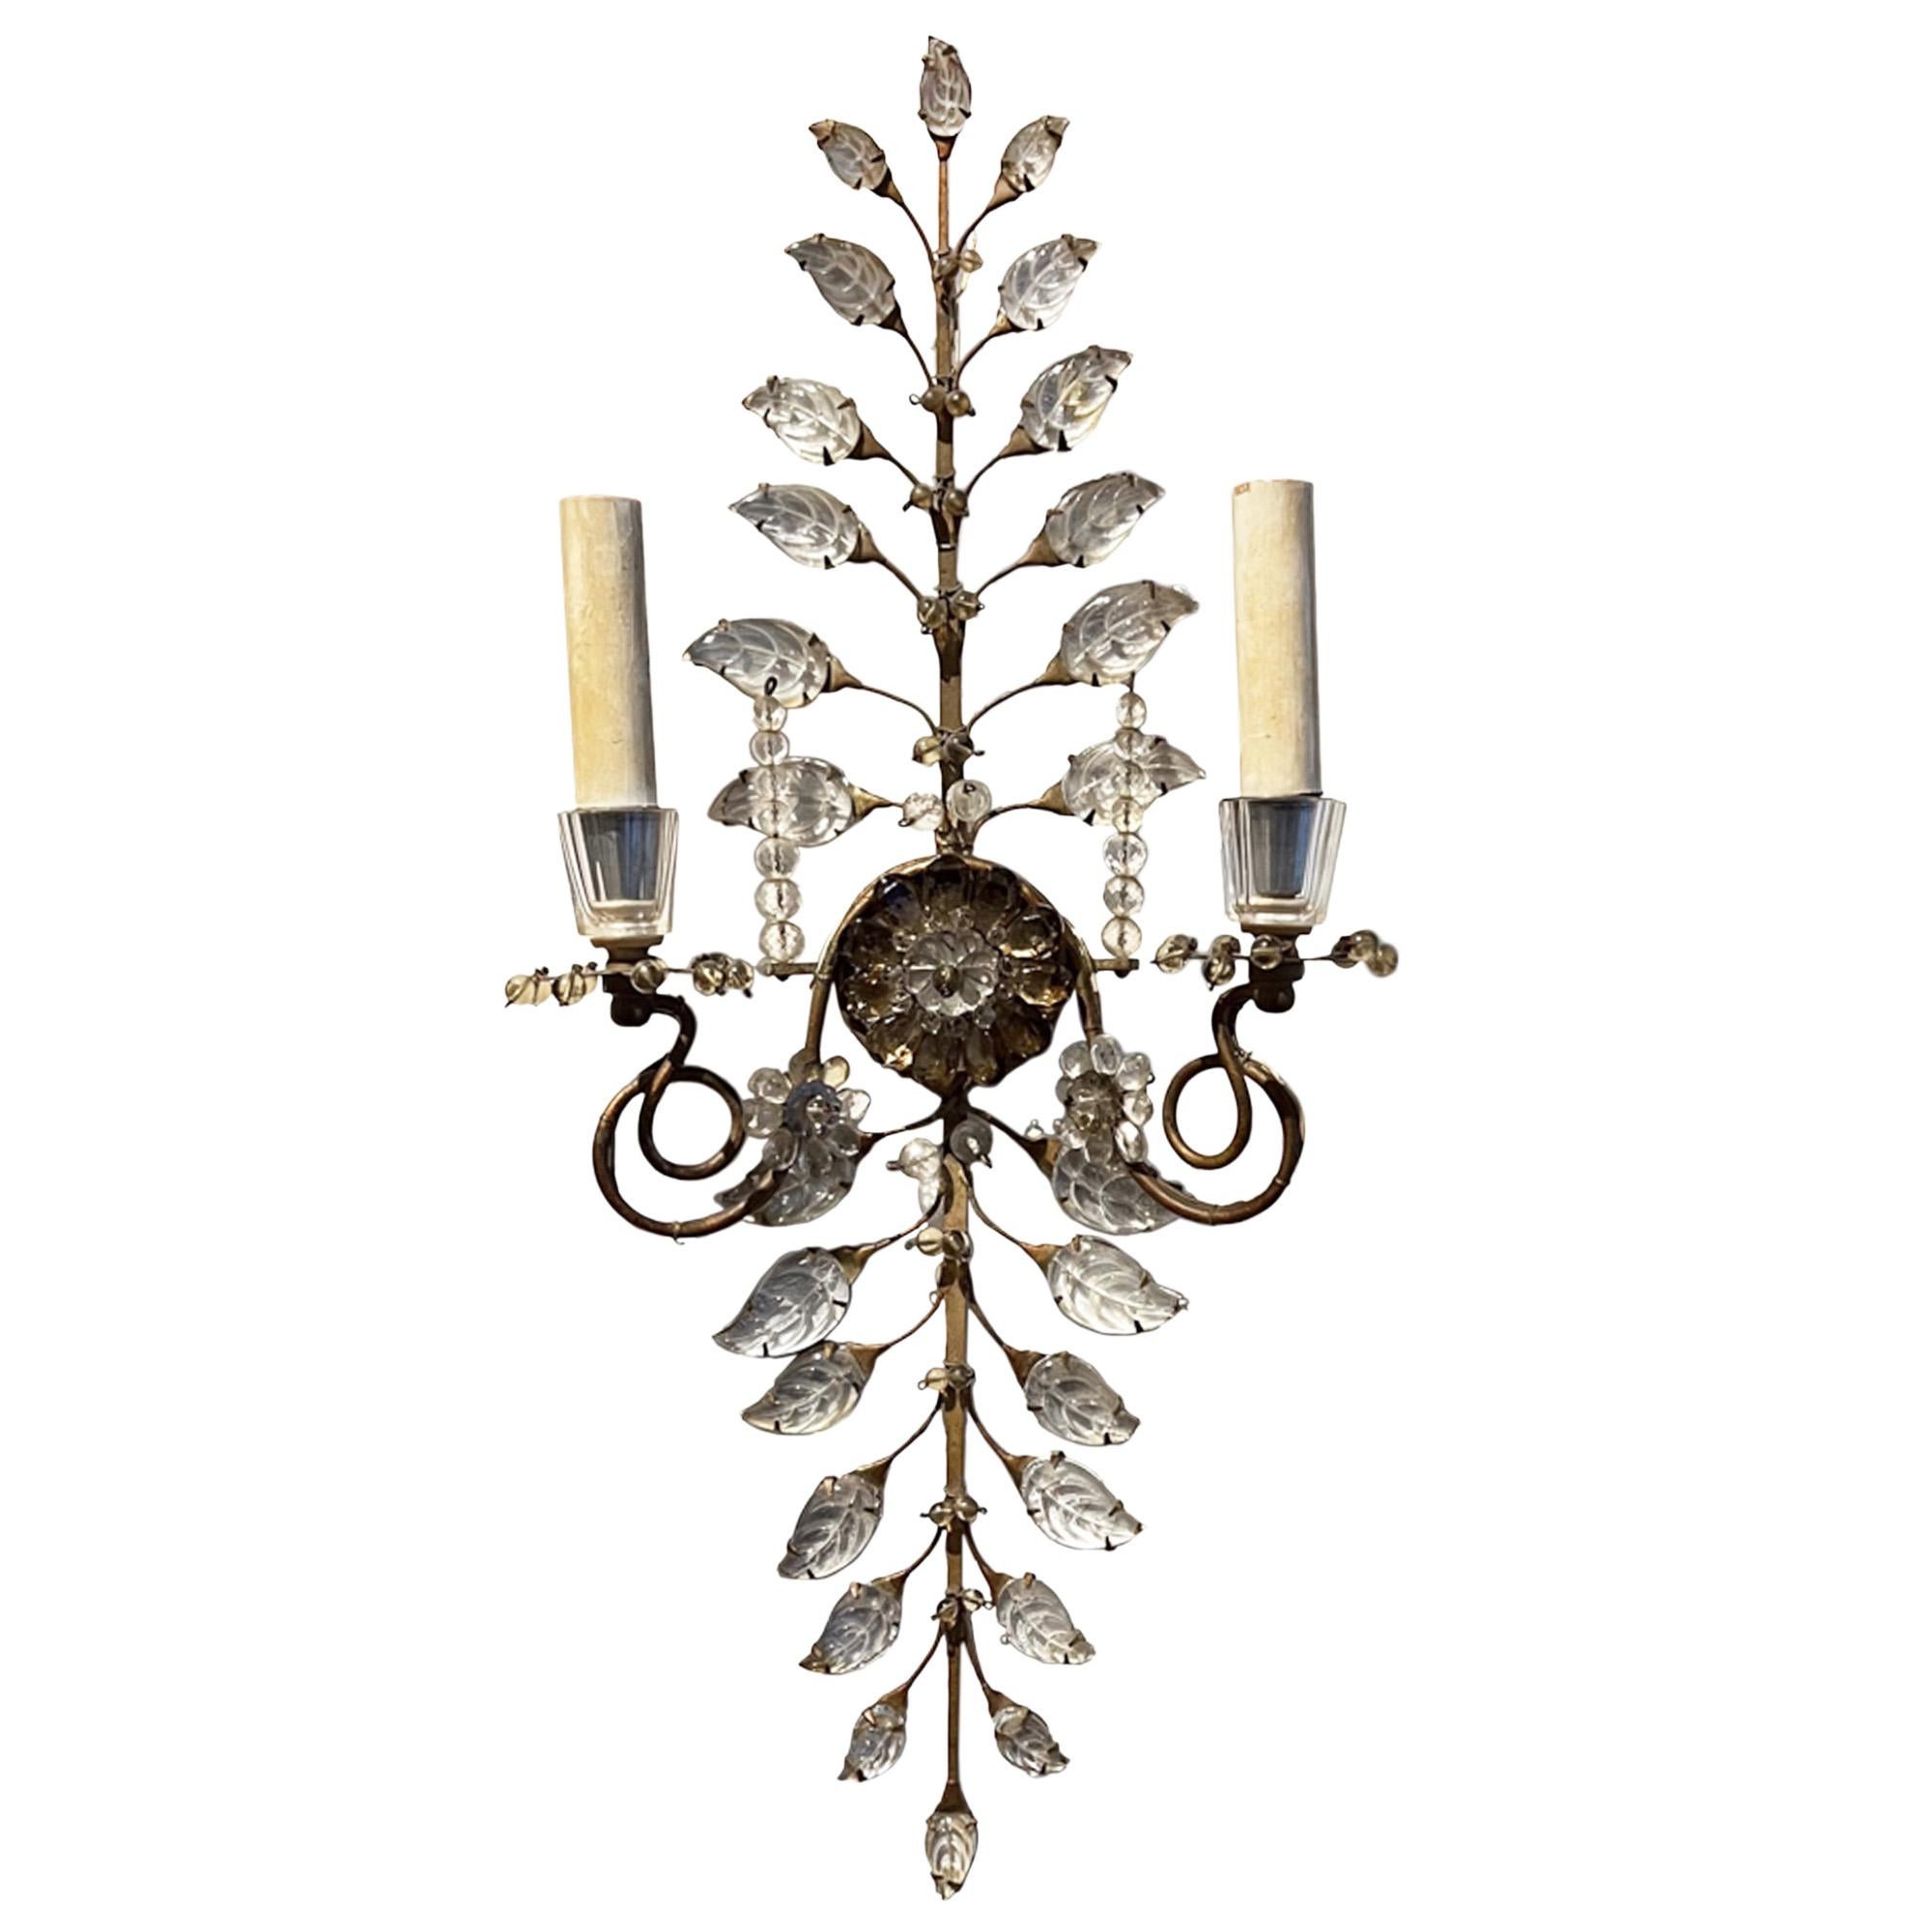 Art Nouveau Large Pair of Maison Baguès Style Wall Sconces With Flowers and Leaves